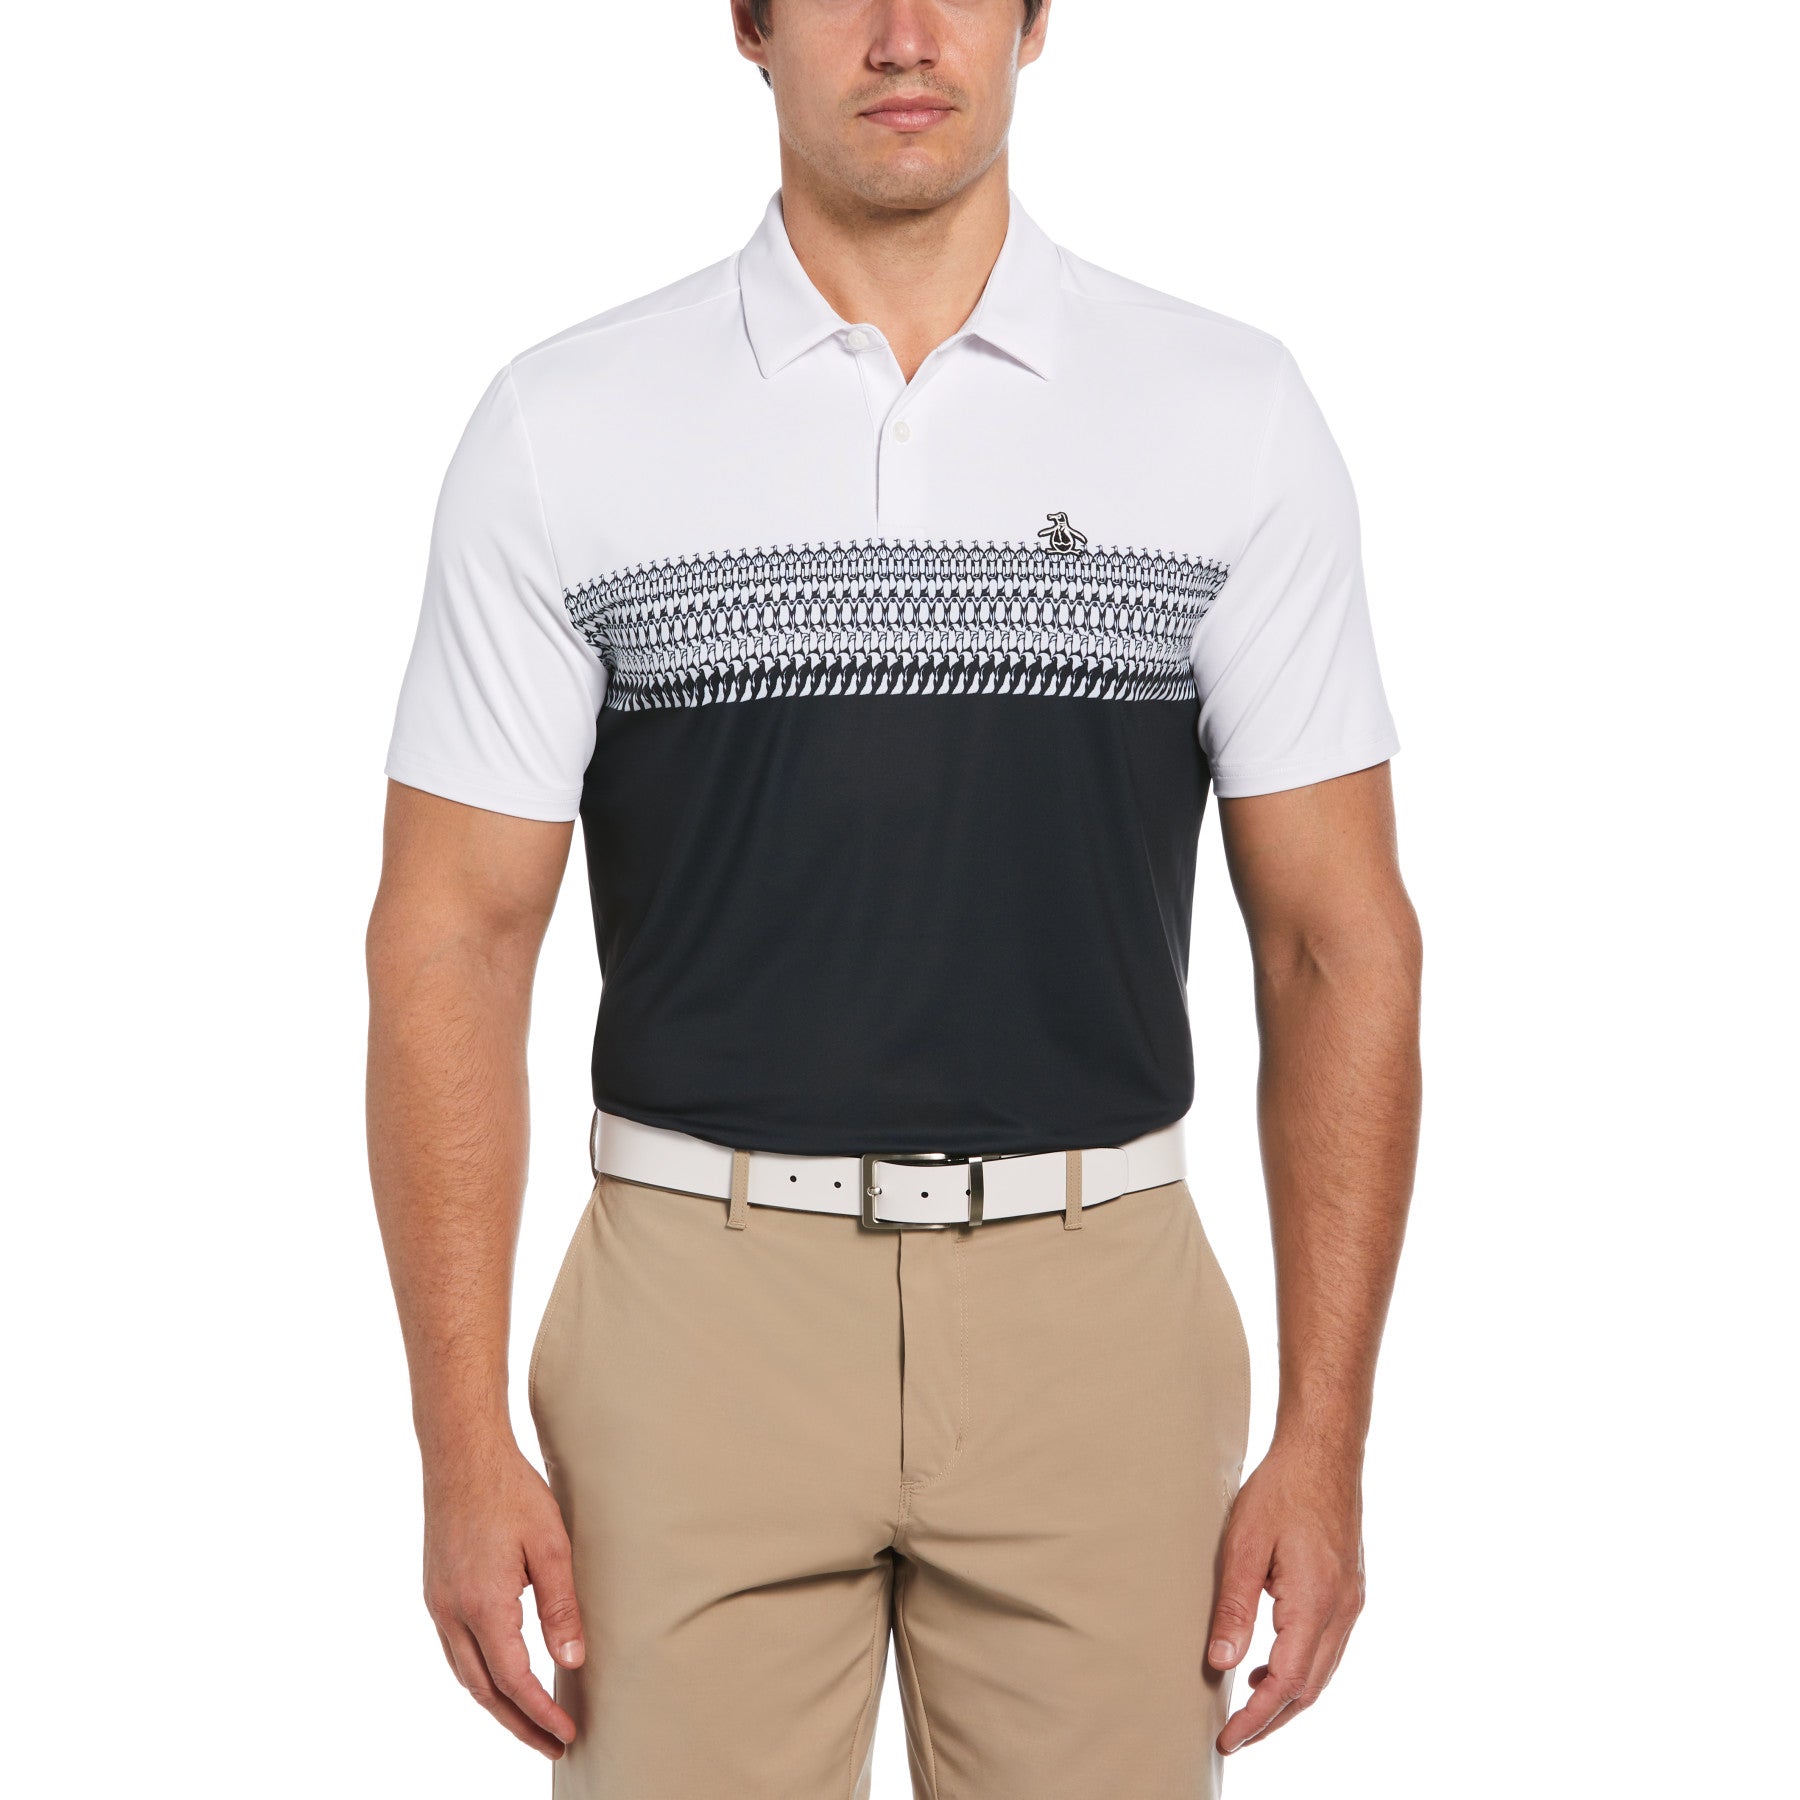 View Penguin Stripe Block Print Short Sleeve Golf Polo Shirt In Bright Whit information